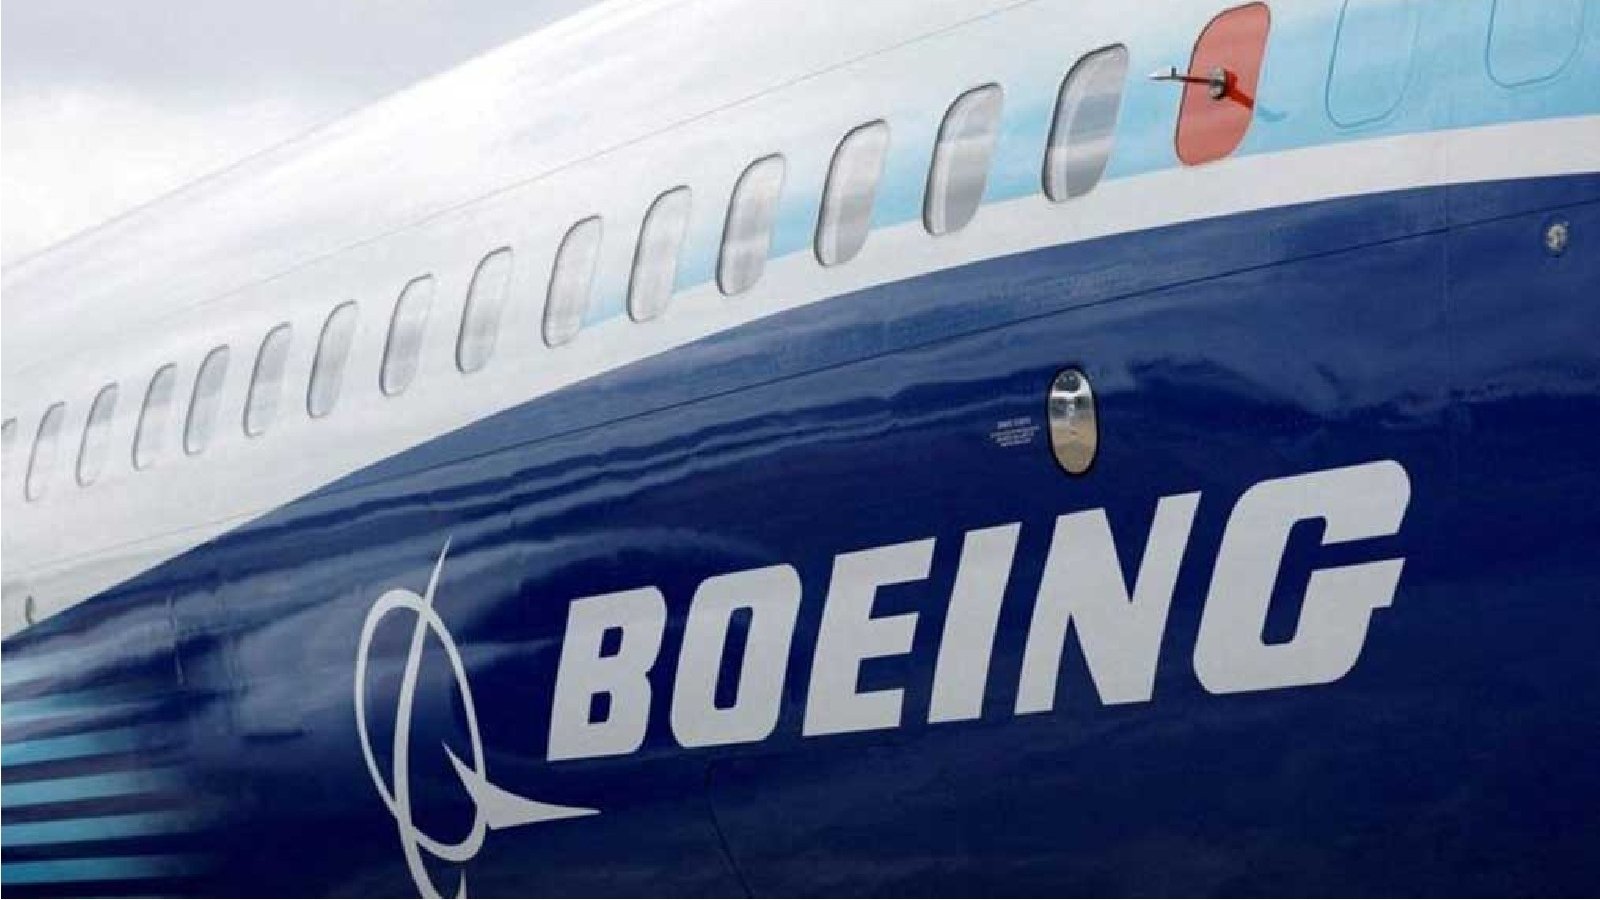 The Boeing logo is seen on the side of a Boeing 737 MAX at the Farnborough International Airshow, in Farnborough, Britain, July 20, 2022. REUTERS